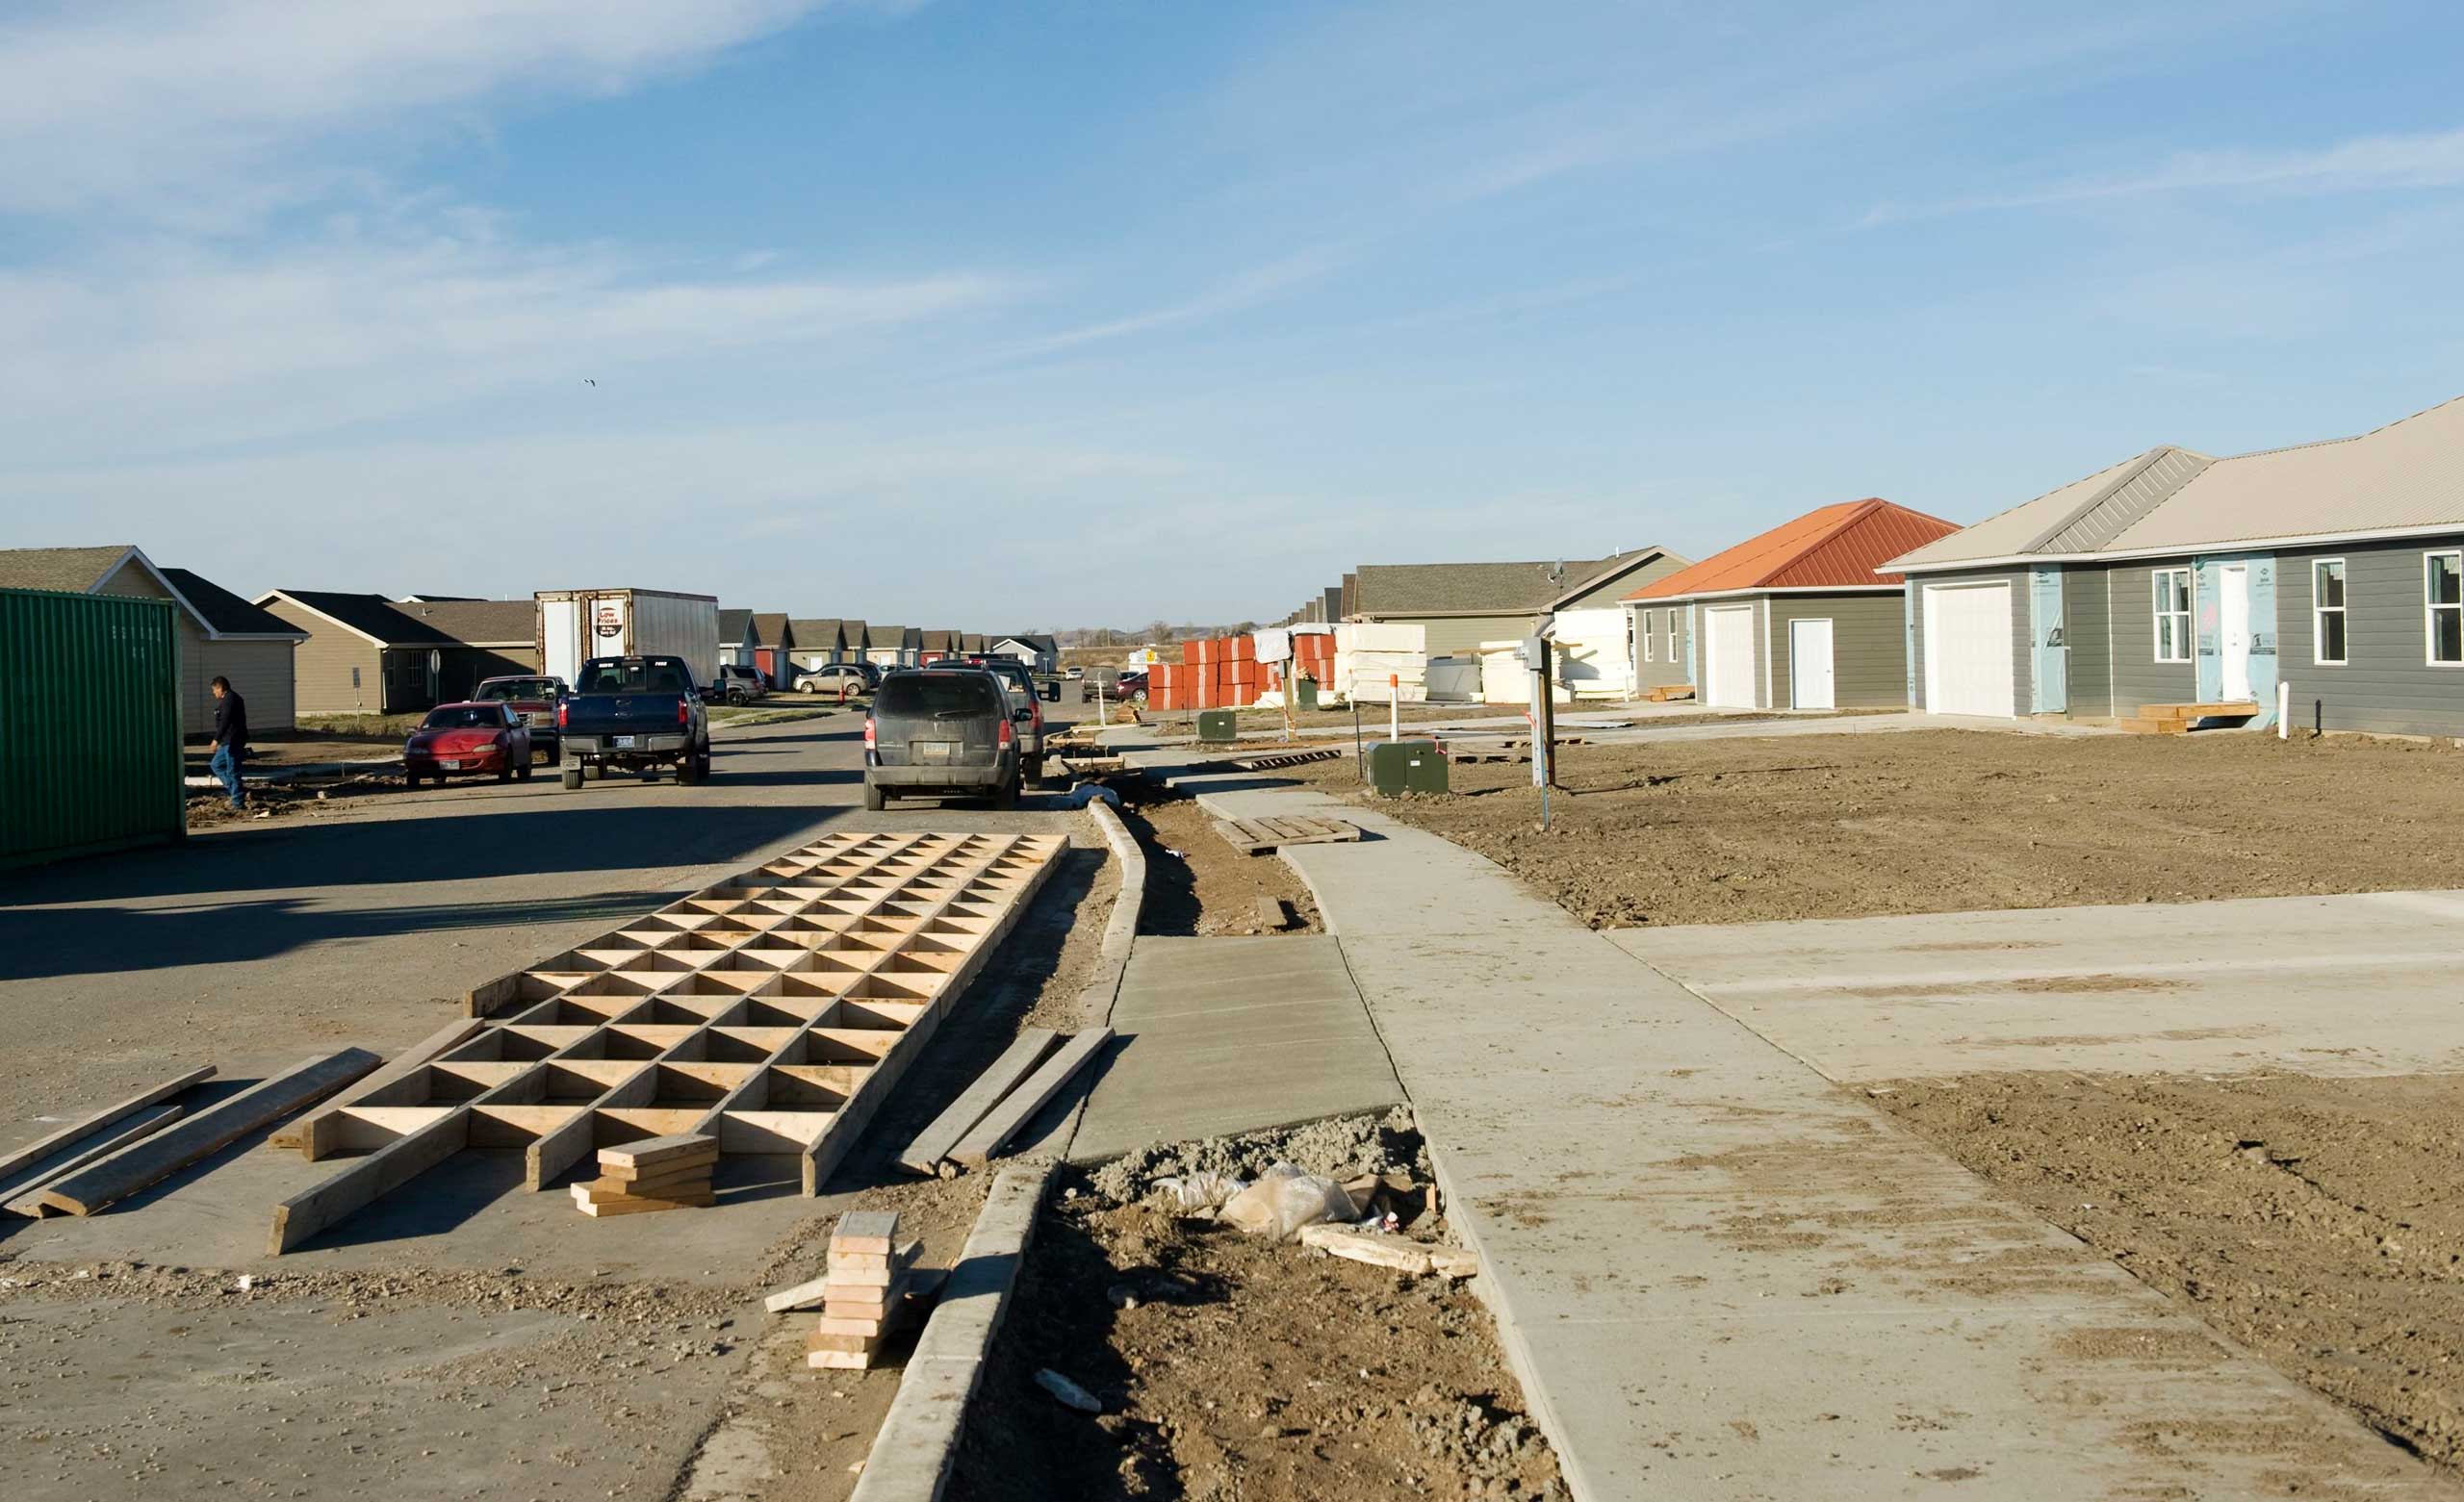 A housing development for members of the Three Affiliated Tribes under construction in New Town on the Fort Berthold Reservation in N.D. on Nov. 1, 2014.